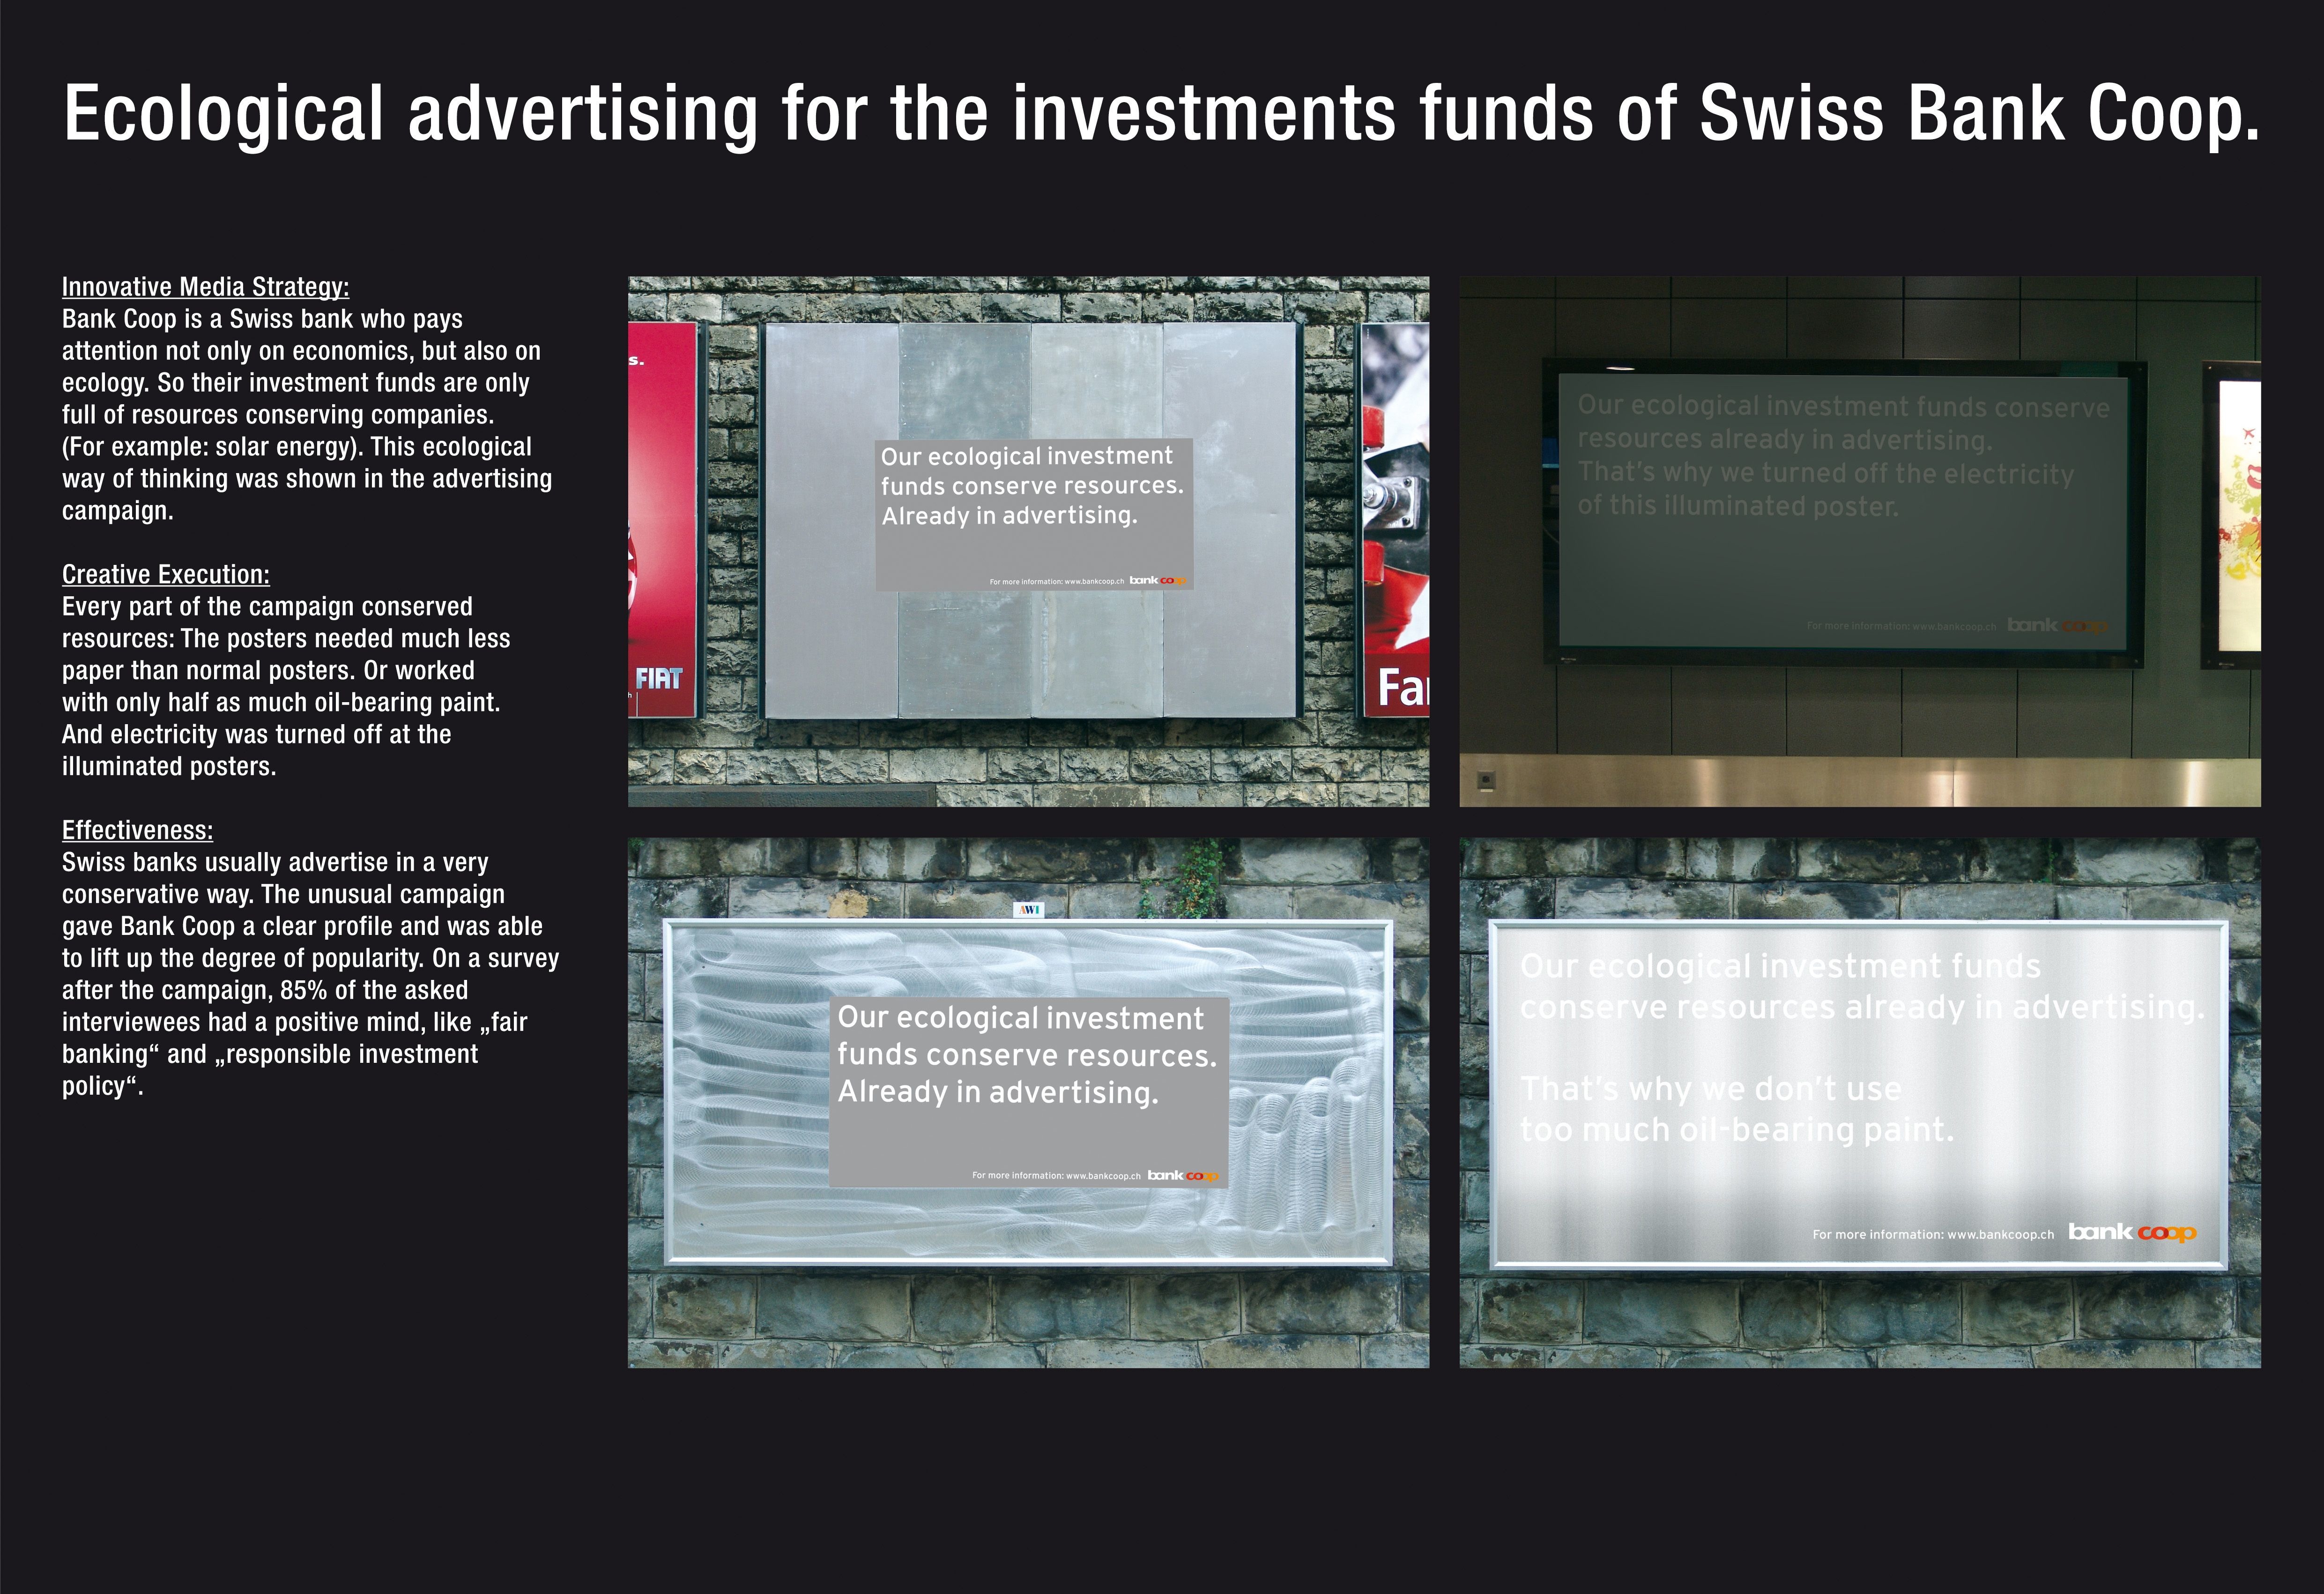 INVESTMENT FUNDS